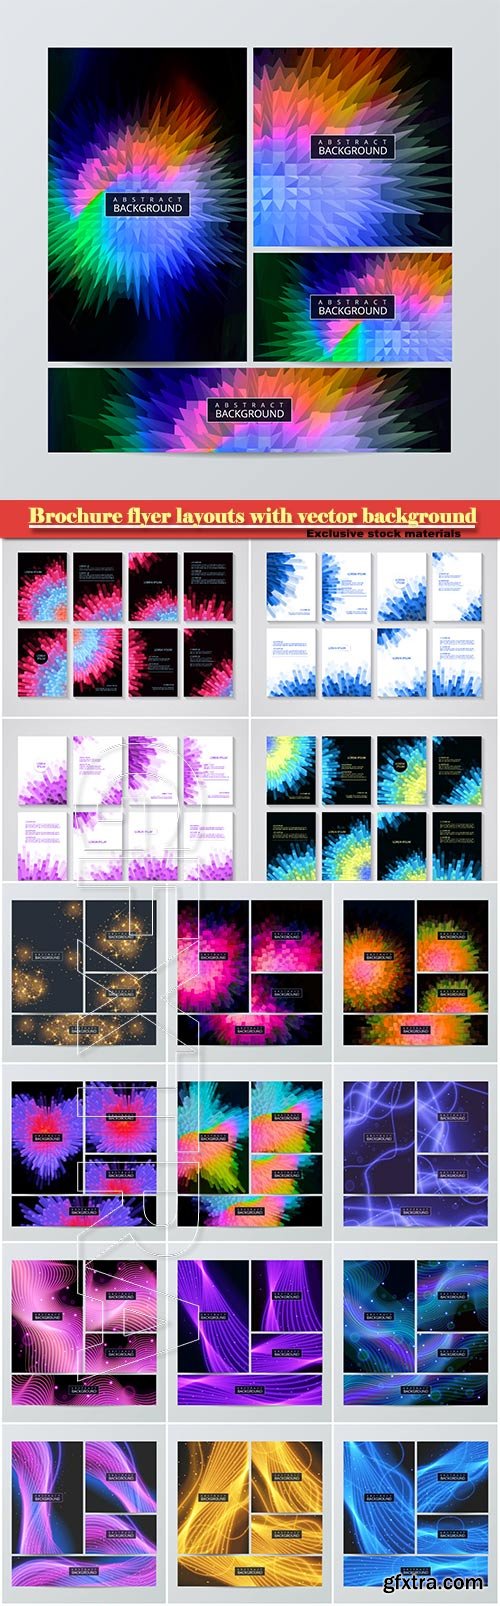 Brochure flyer layouts with vector abstract colorful background